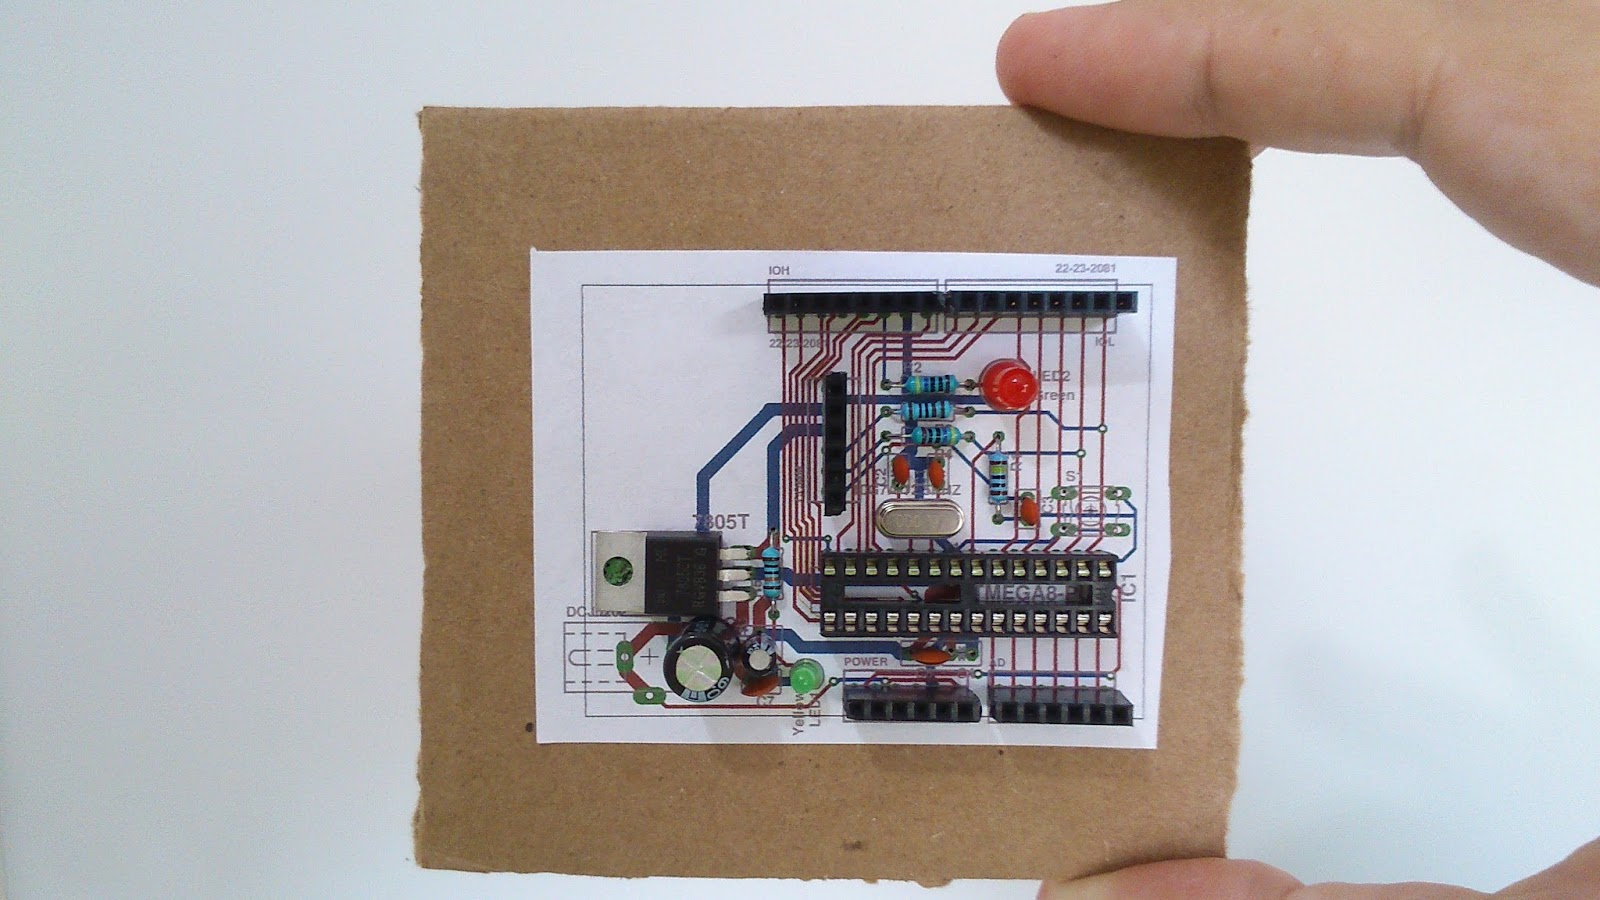 A PCB mockup out of cardboard